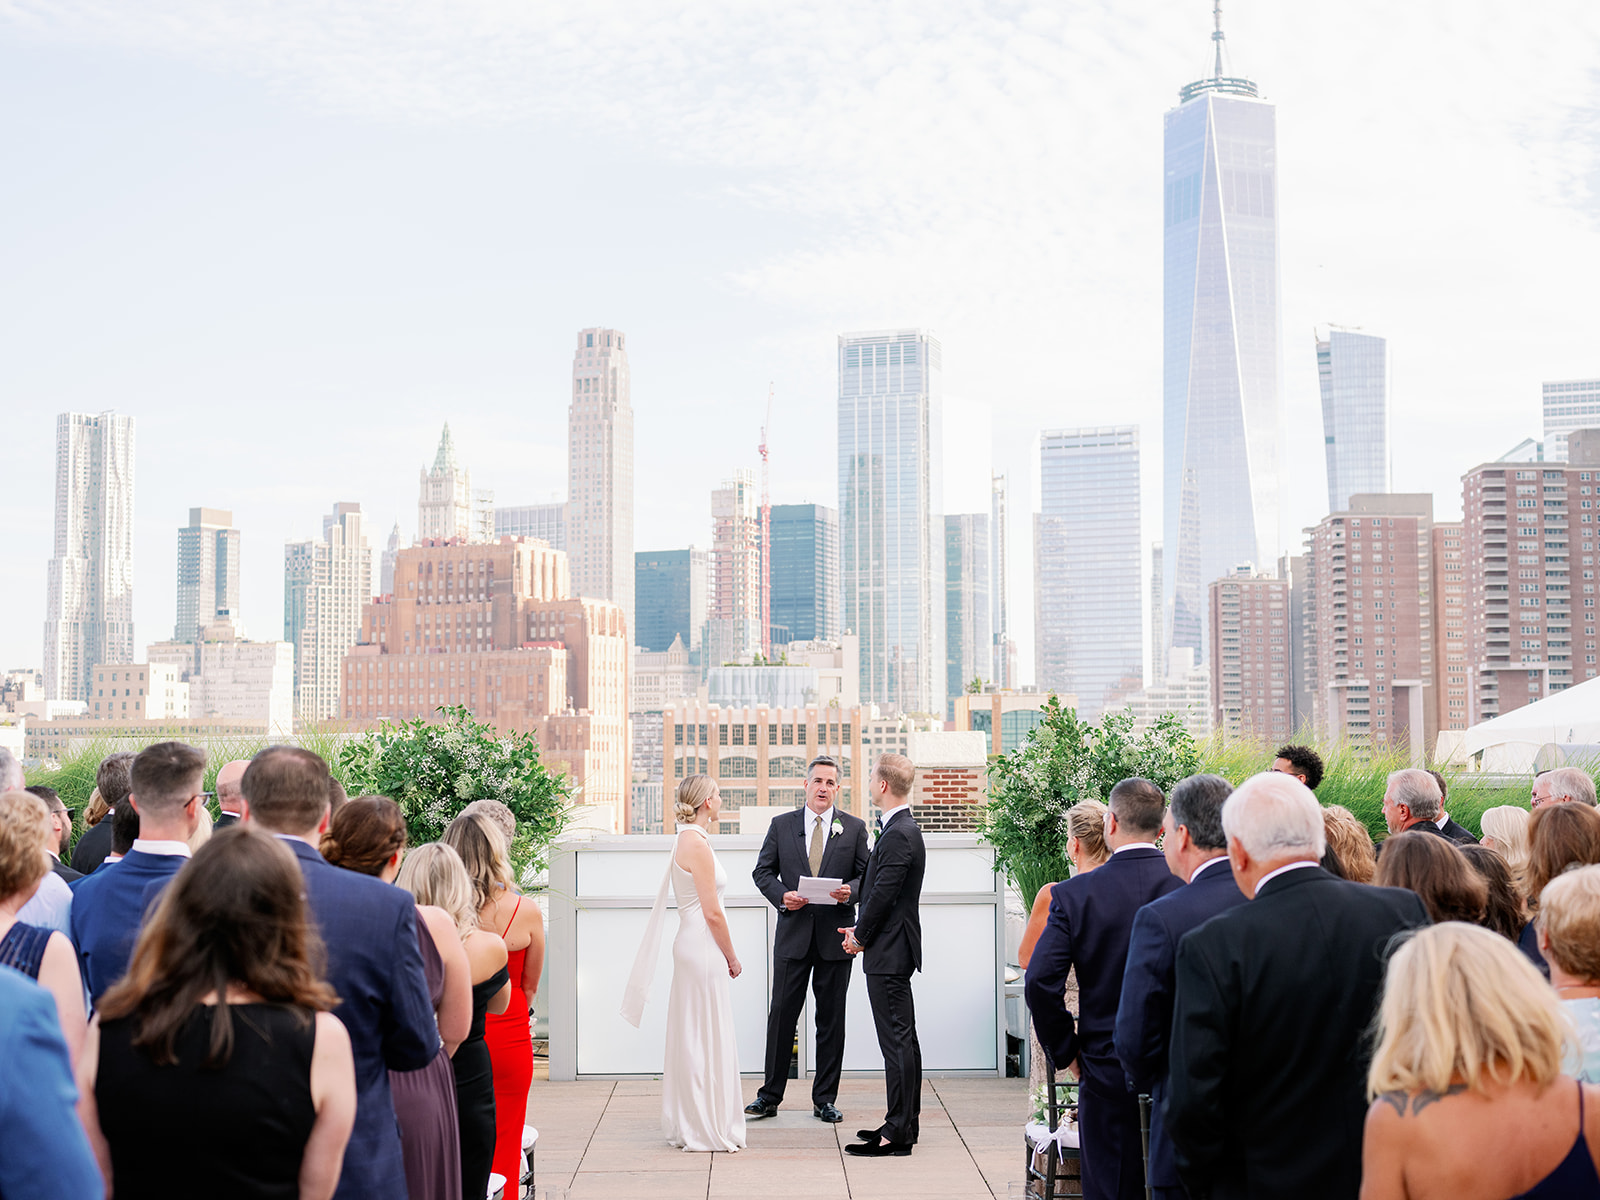 Tribeca Rooftop wedding captures the bride and groom at the altar, guests seated, against a backdrop of breathtaking city views.